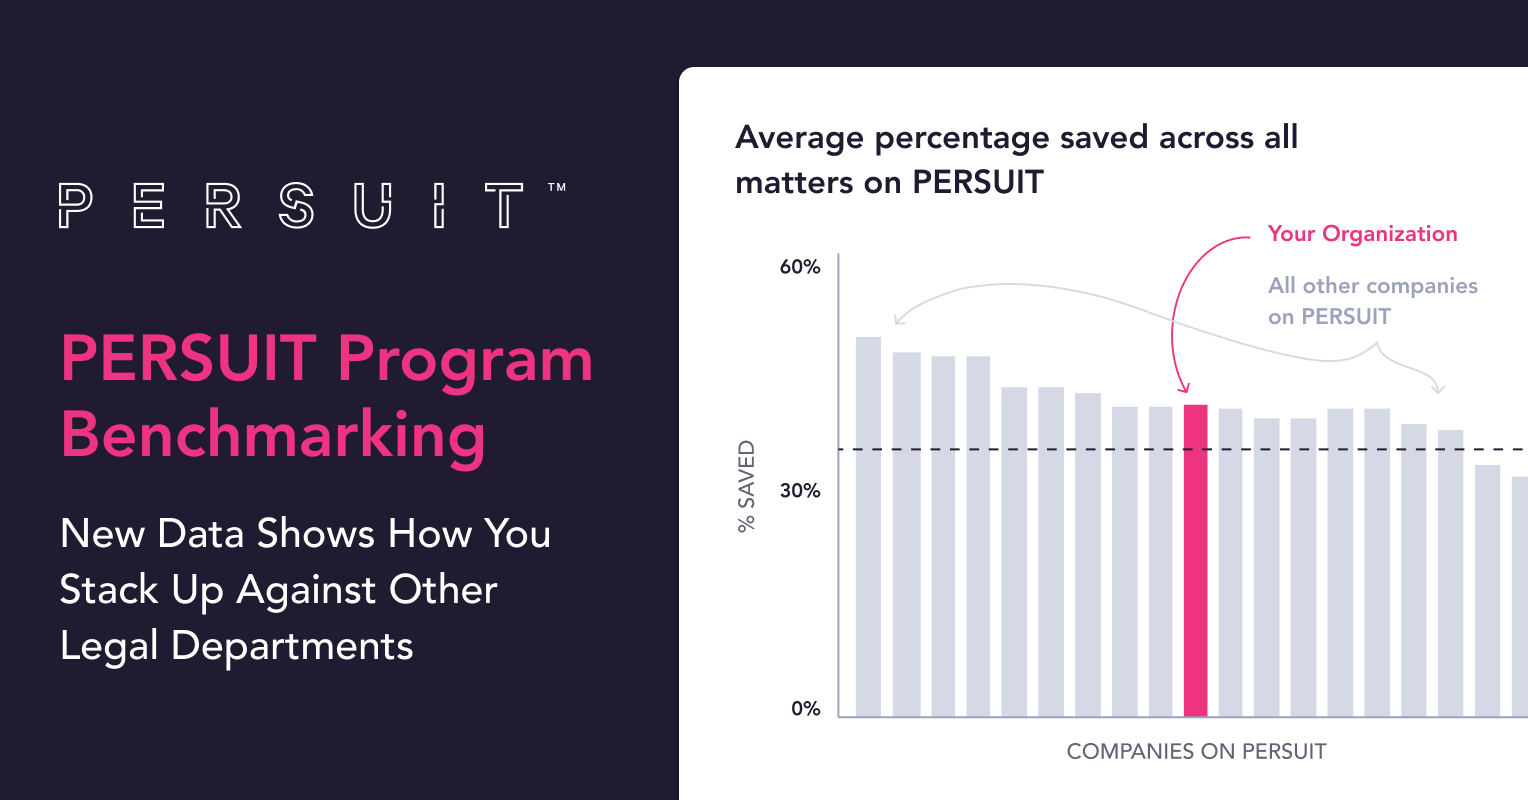 PERSUIT Program Benchmarking: How Do You Compare to Other Legal Teams?